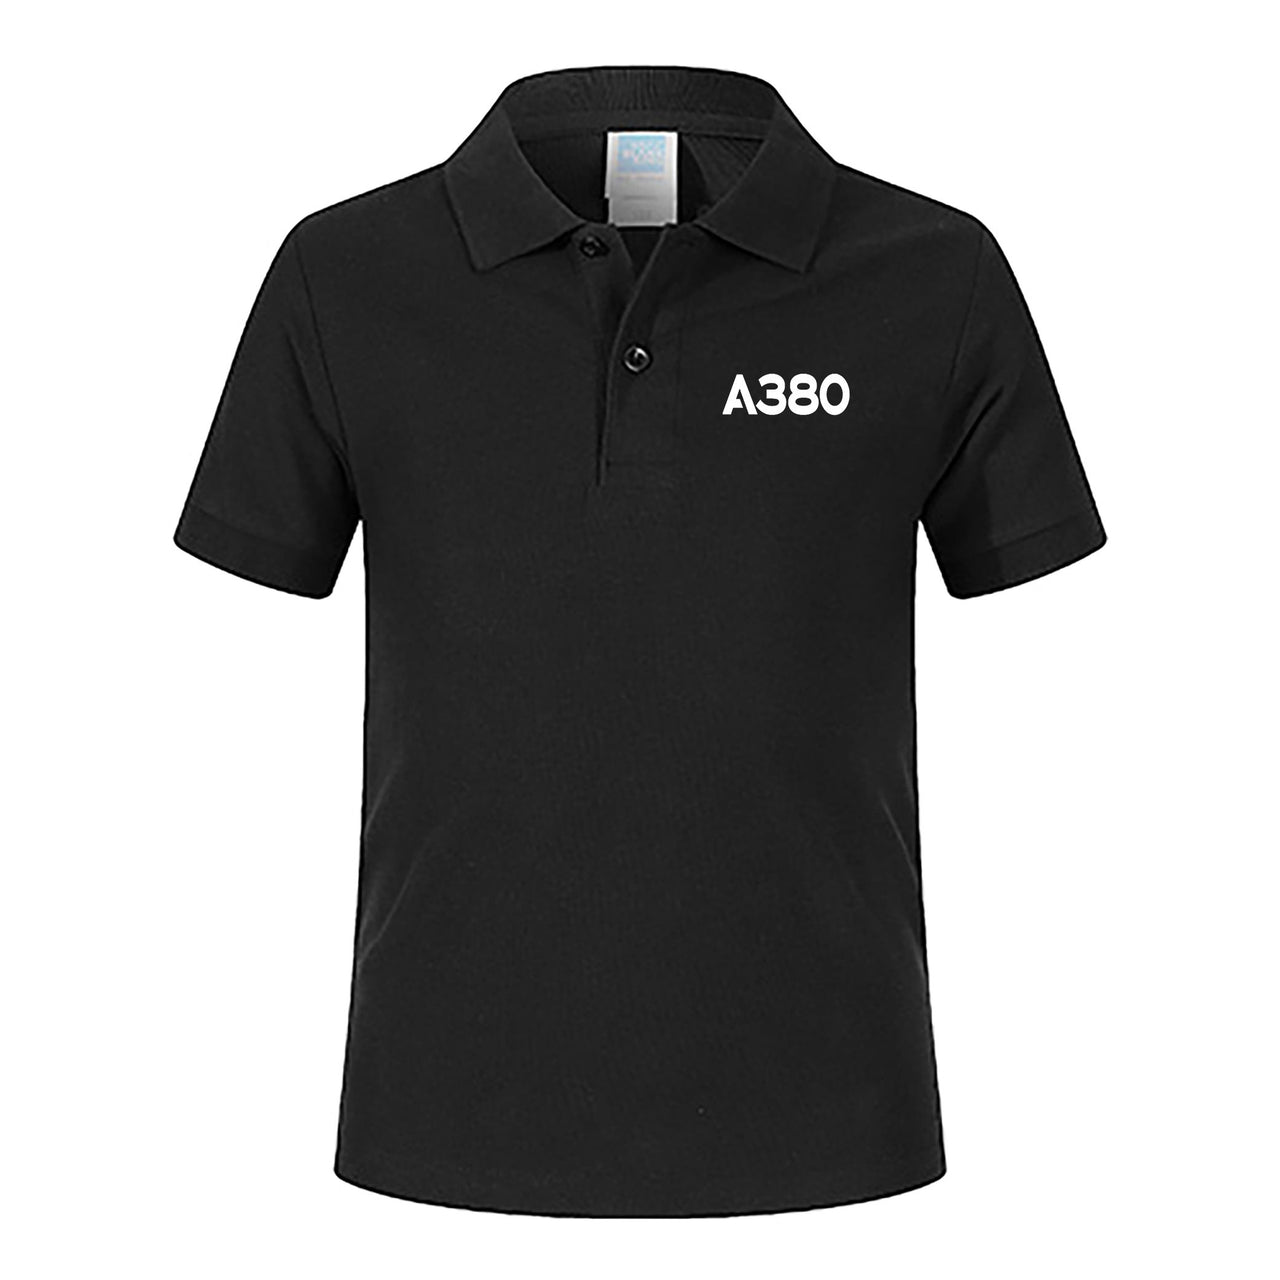 A380 Flat Text Designed Children Polo T-Shirts